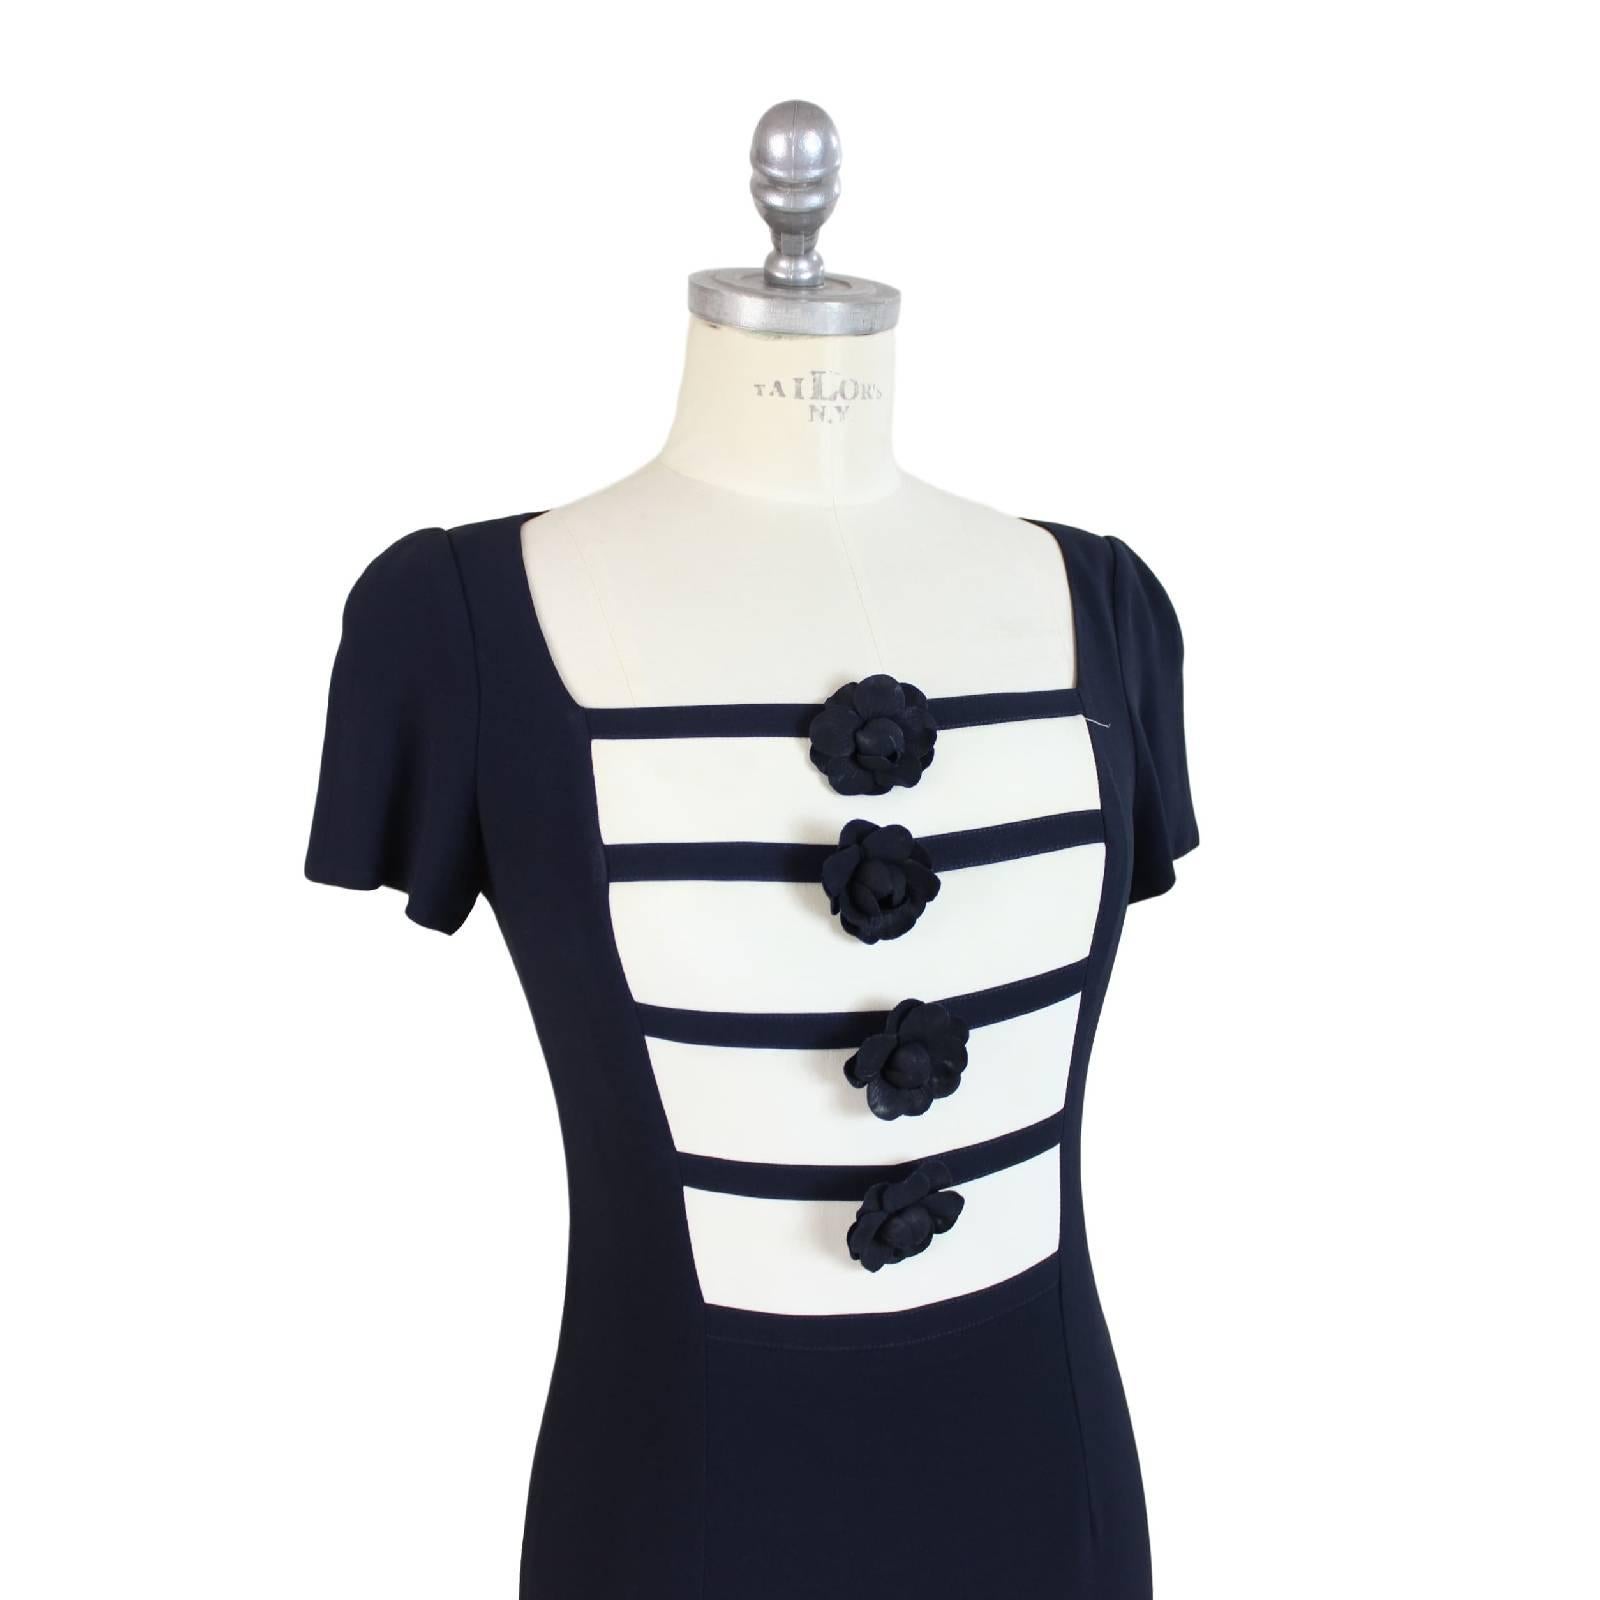 Mimmina vintage dress 1980s sheath blue and white rose applied size 6 US In Excellent Condition For Sale In Brindisi, IT